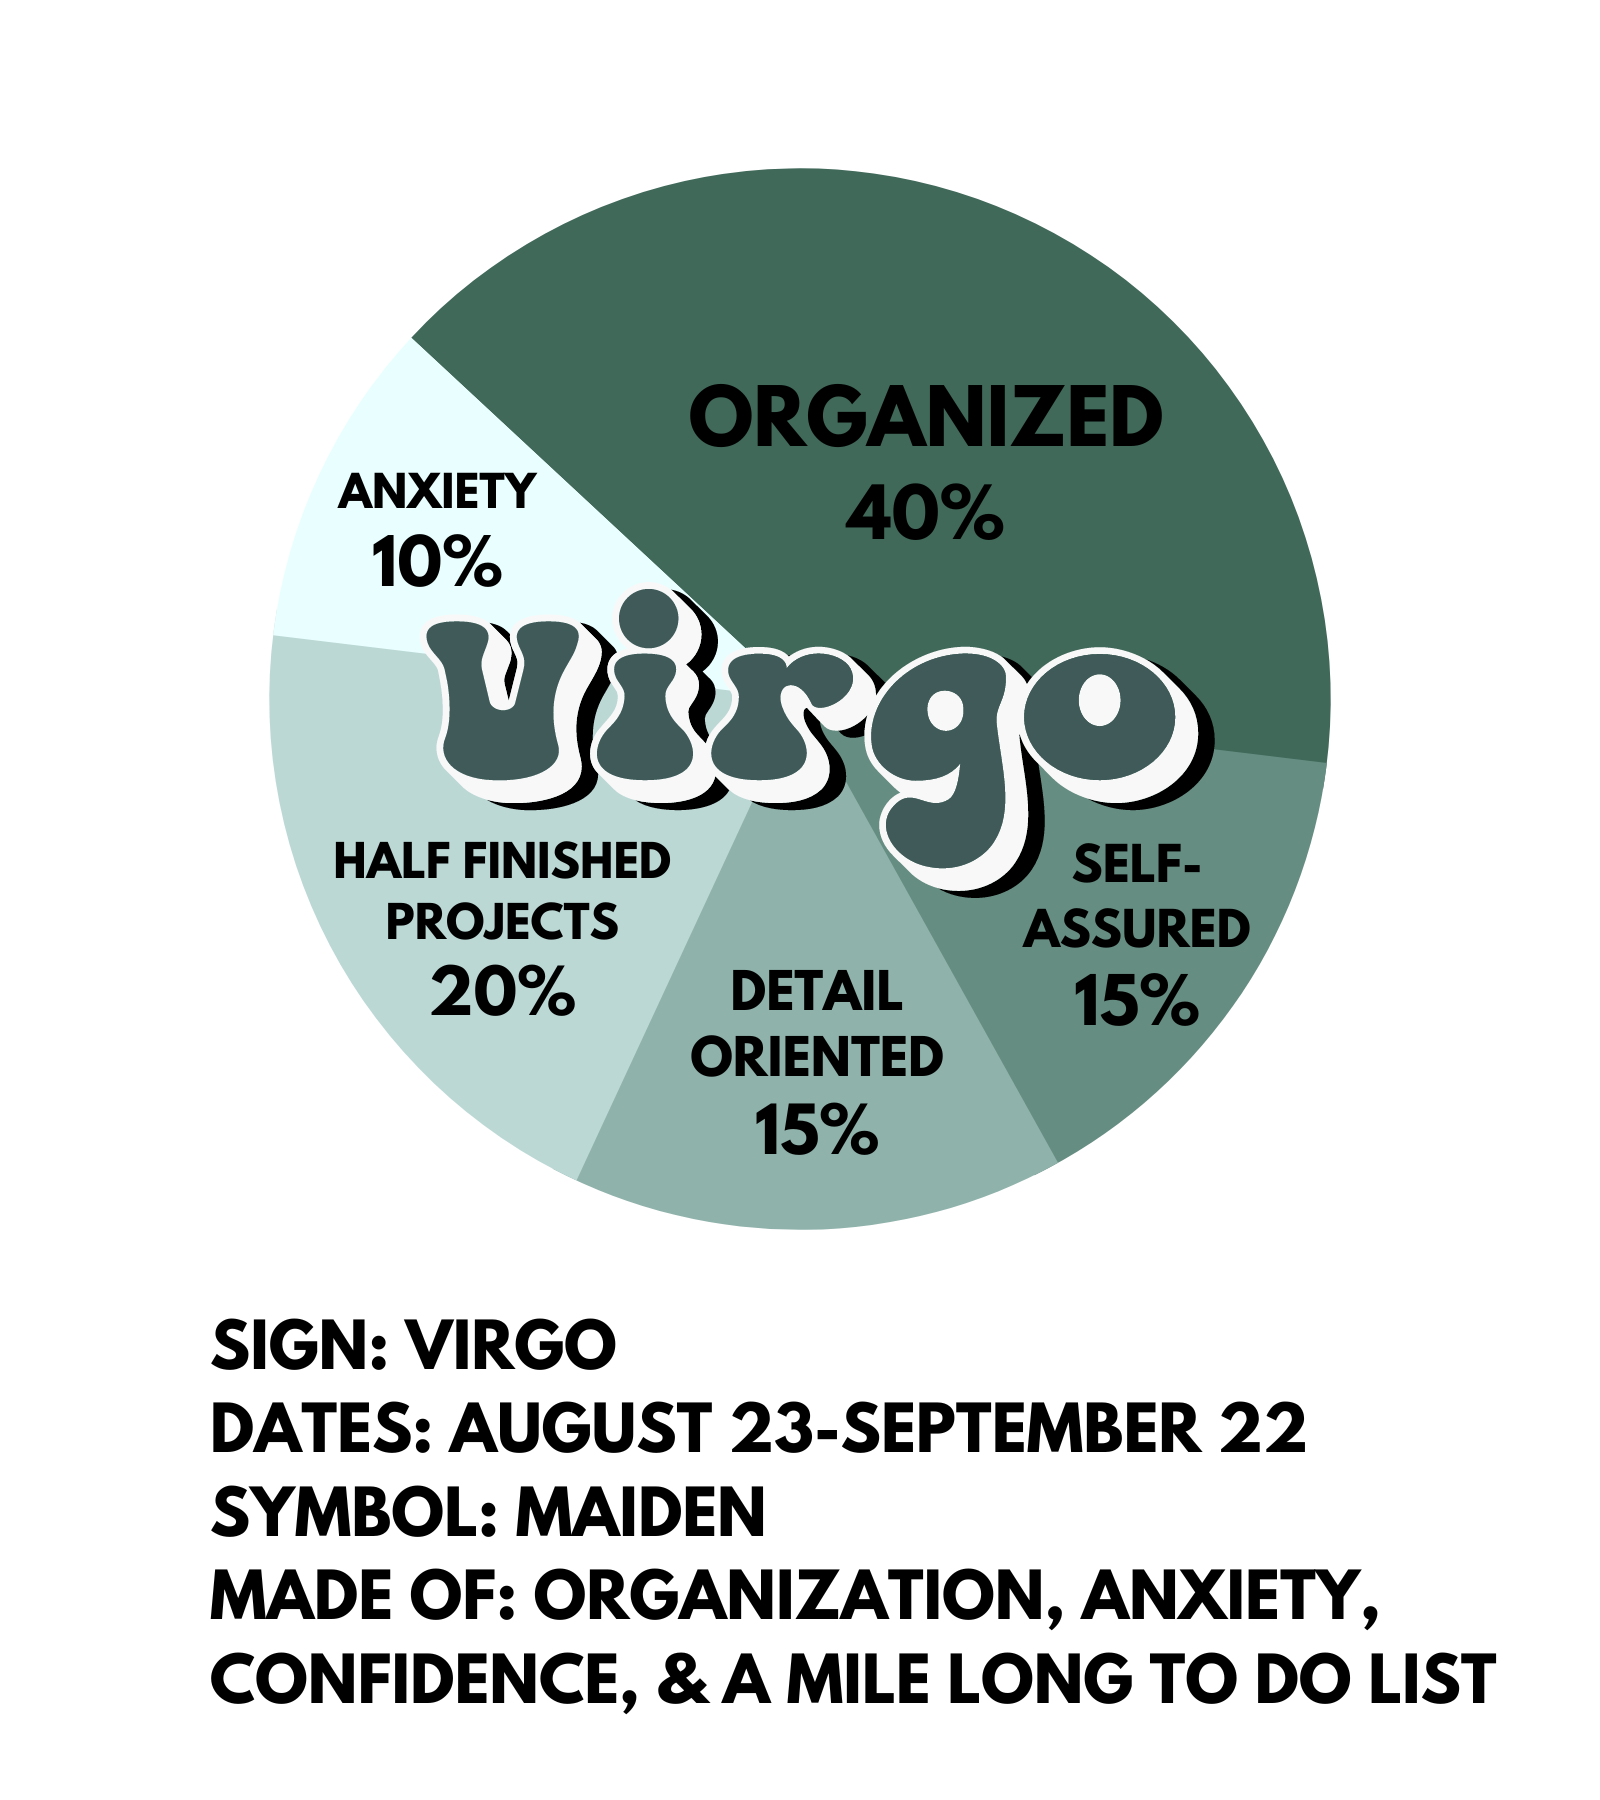 A circular sticker design of a pie chart, with the word Virgo in the middle. The pie chart is broken up into 5 sections: 40% organized, 15% self-assured, 15% detail oriented, 20% half finished projects, & 10% anxiety. Underneath the design there is the text: SIGN: VIRGO DATES: AUGUST 23-SEPTEMBER 22 SYMBOL: MAIDEN MADE OF: ORGANIZATION, ANXIETY, CONFIDENCE, & A MILE LONG TO DO LIST.